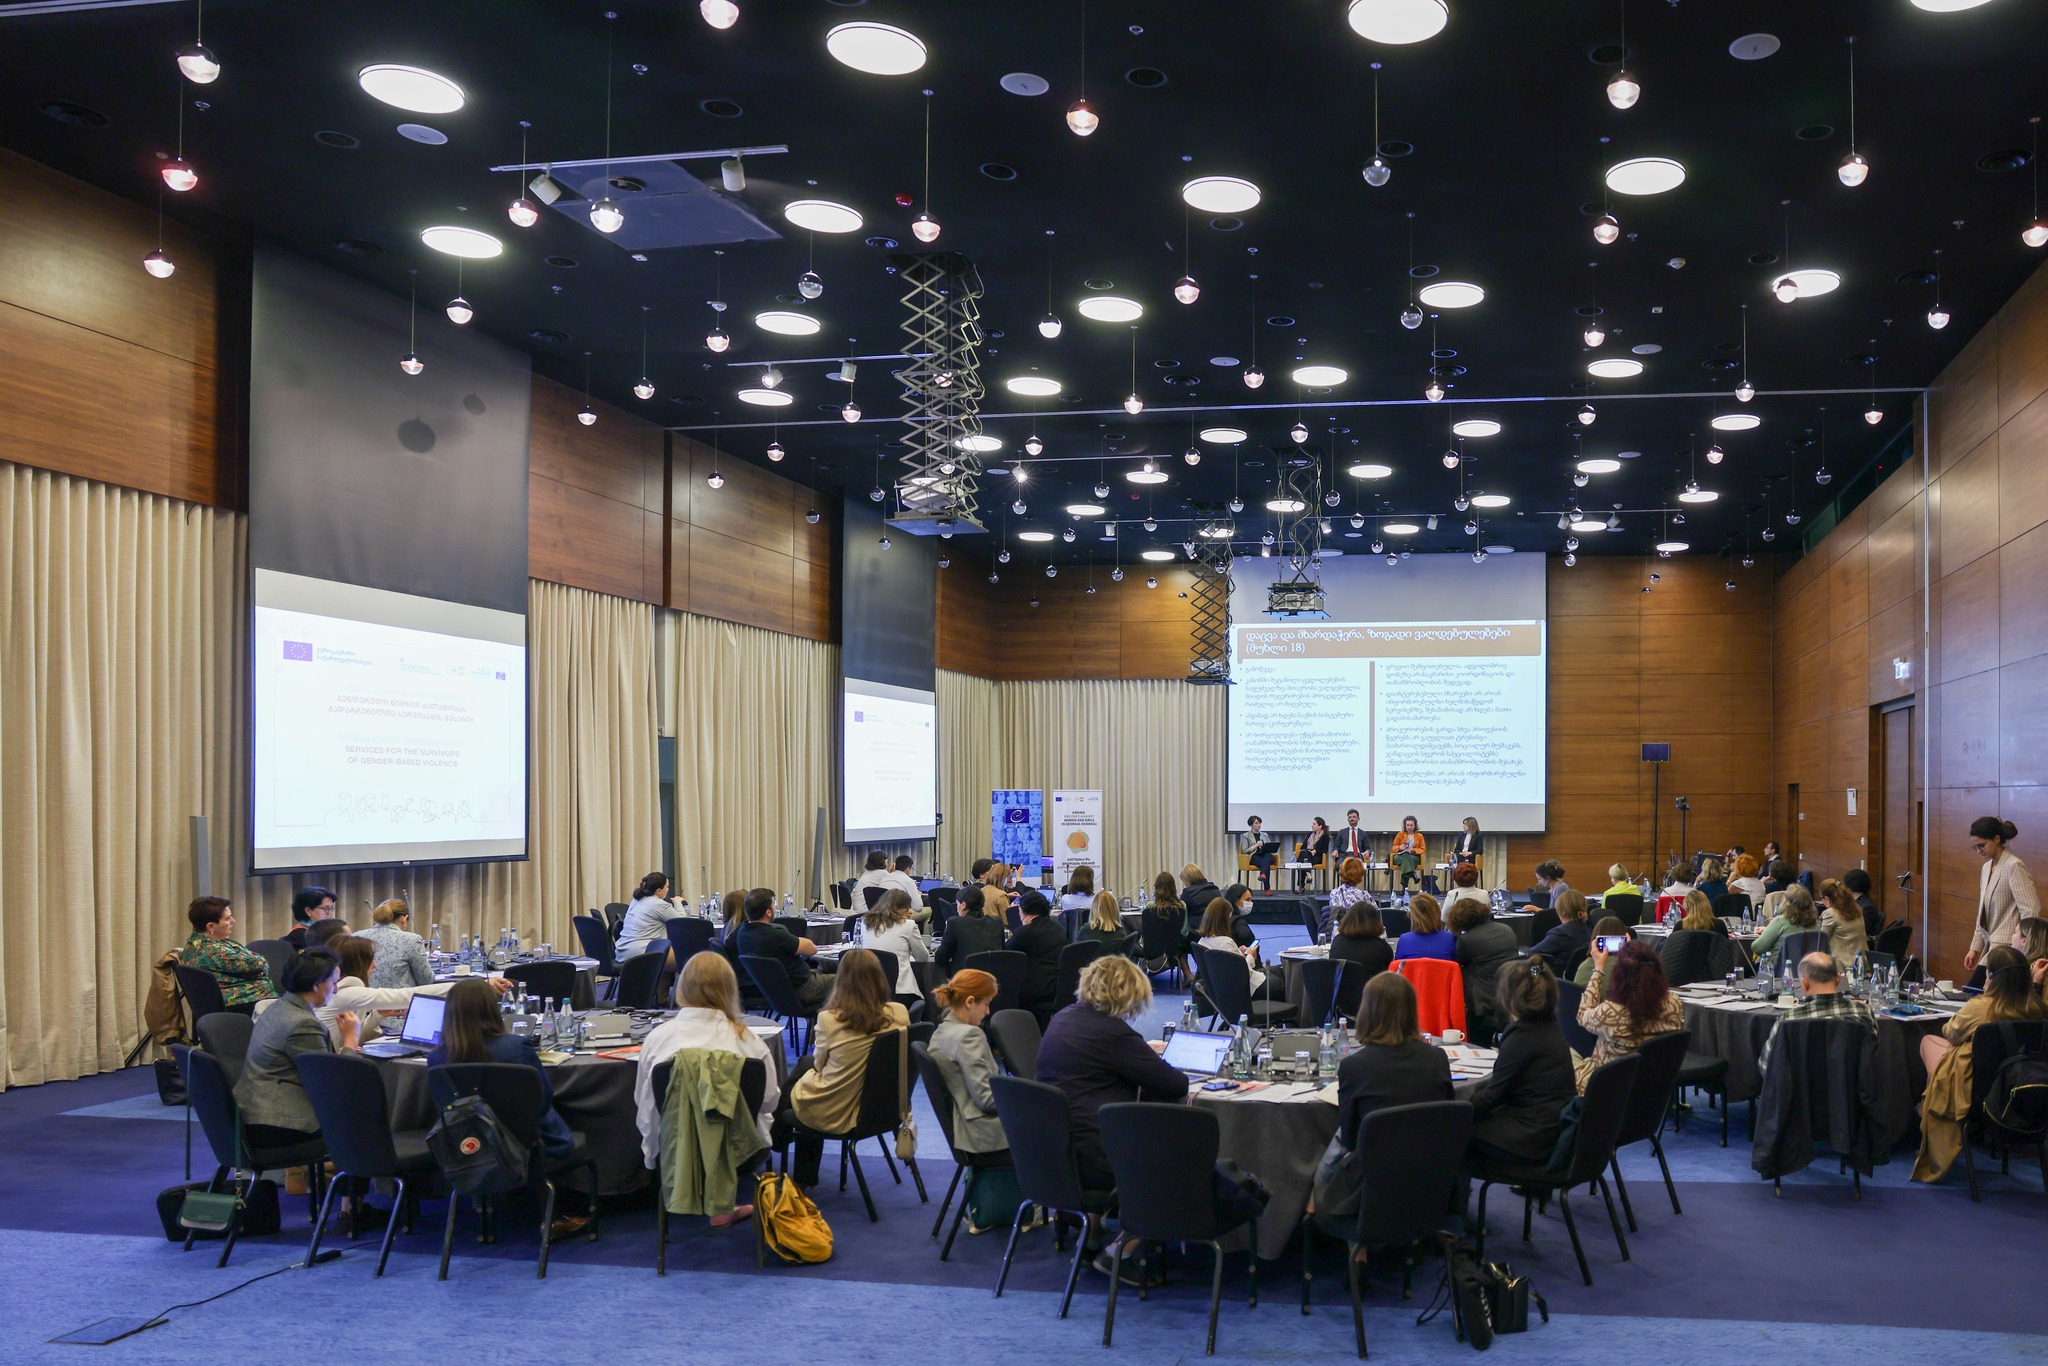 The first International Conference on Services for the Survivors of Gender-Based Violence